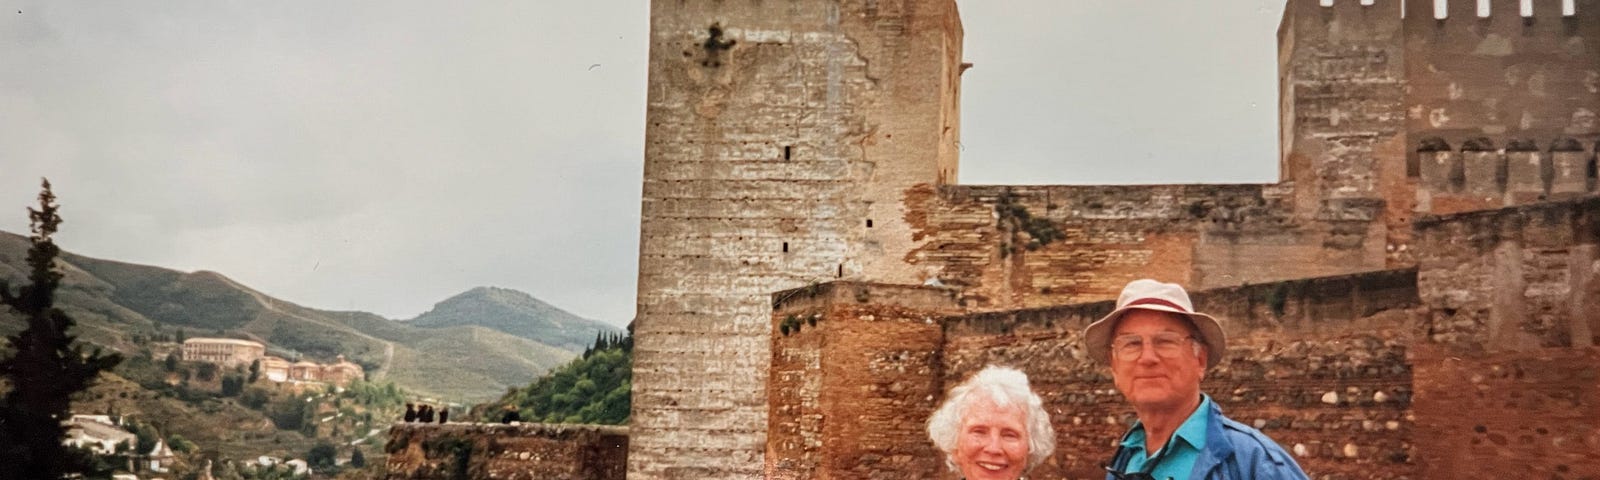 A photo taken of Charme and Warner Hughes in front of an old castle.